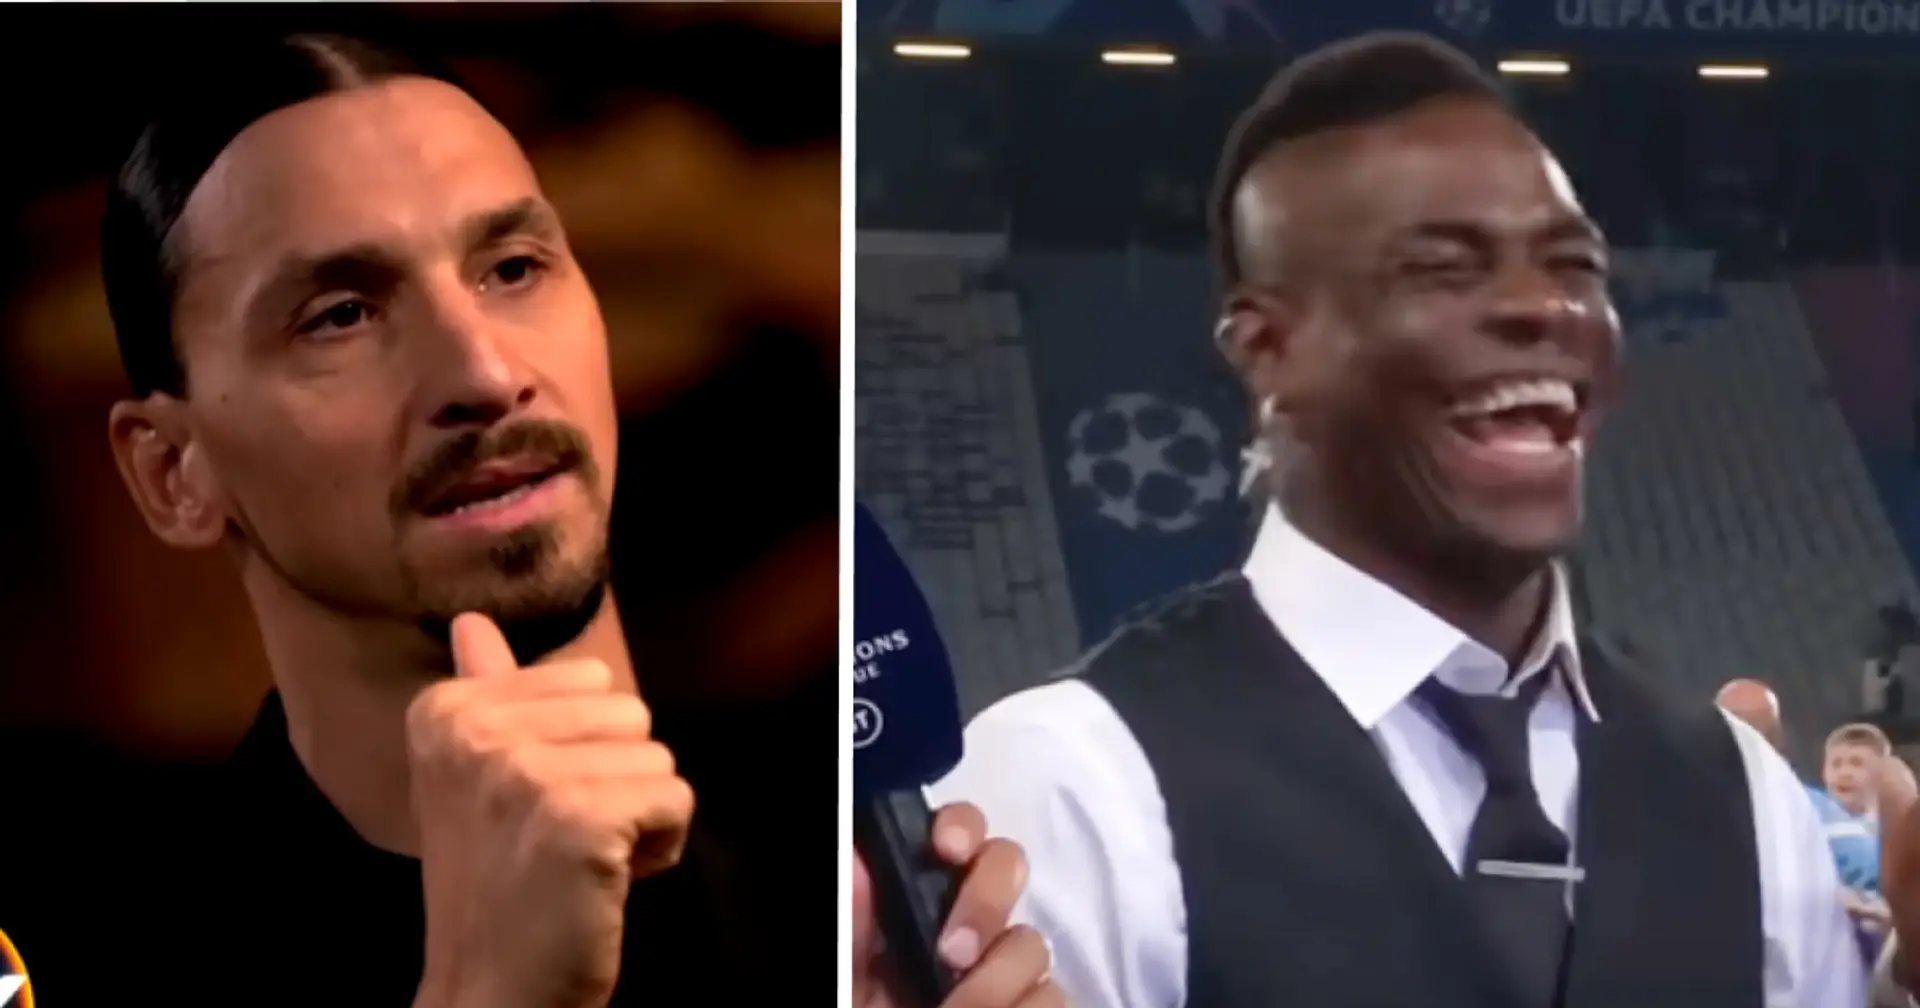 Balotelli brutally replies ex-Barca striker Ibrahimovic after he criticized his career